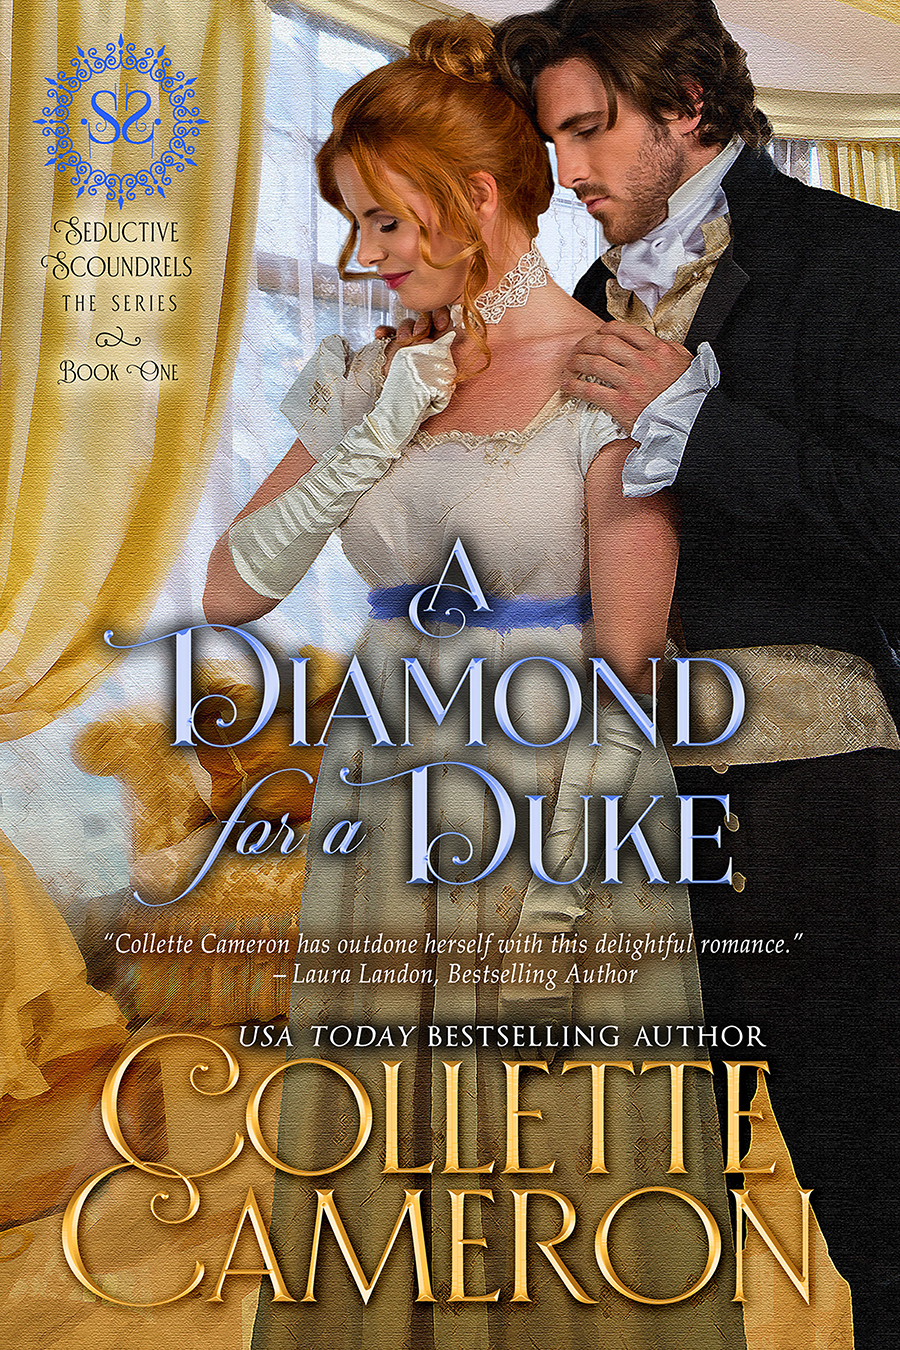 A Diamond for a Duke is only 99¢!